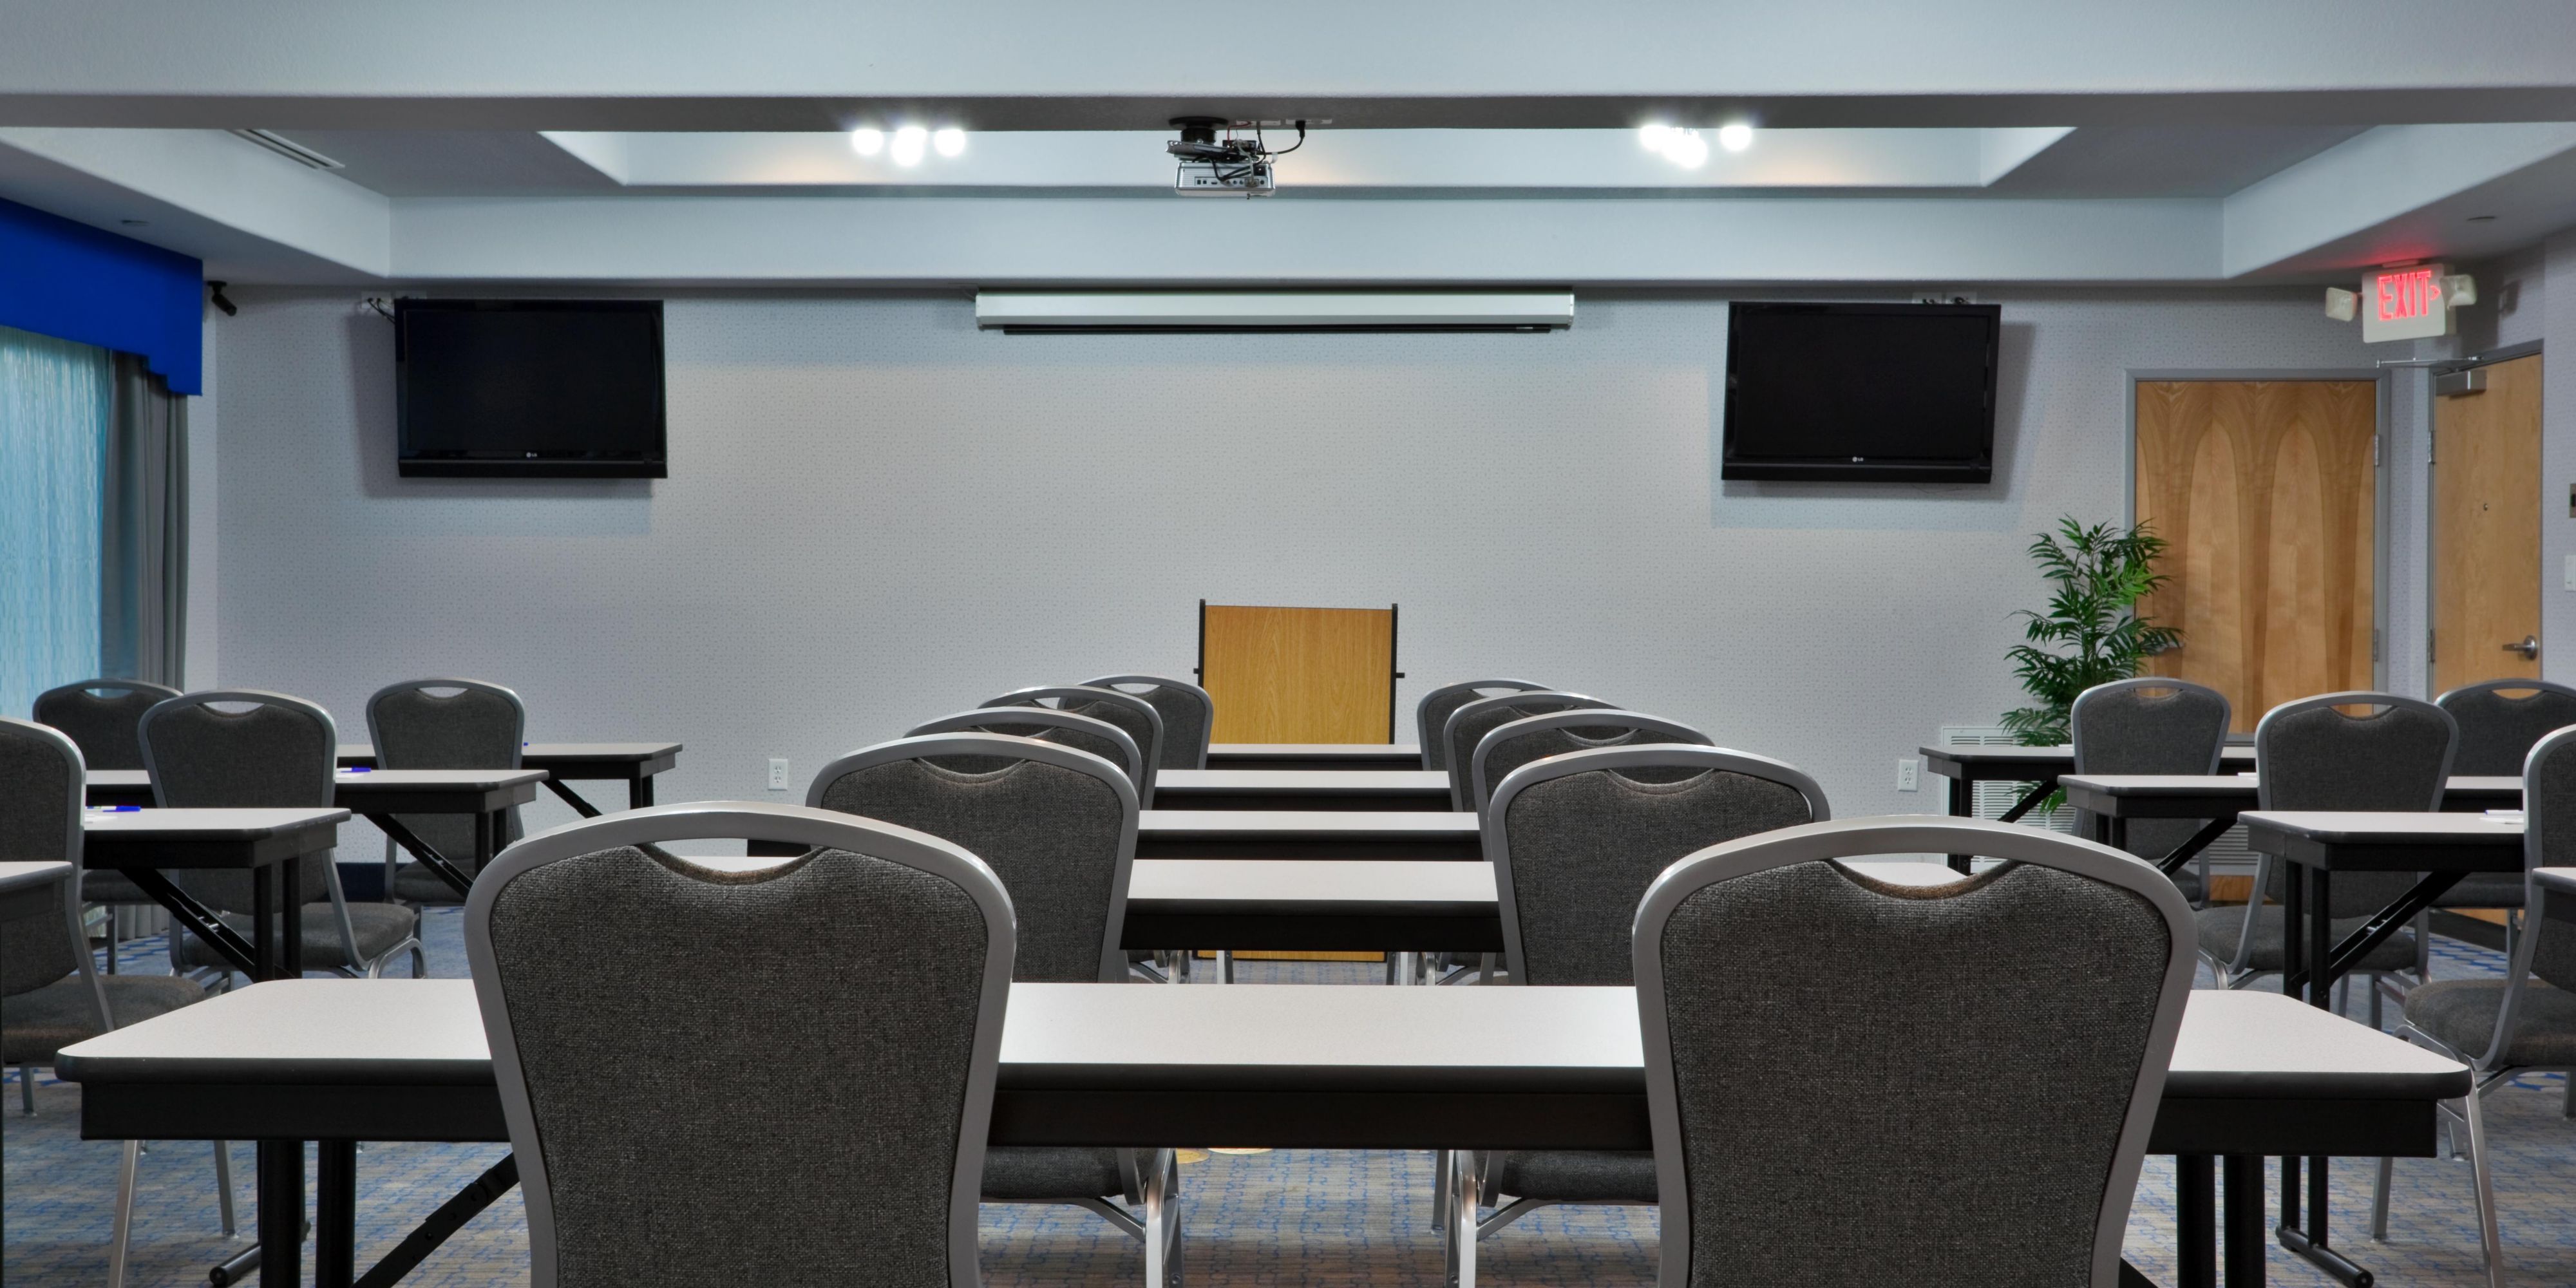 Meet with Confidence! Our Meeting Space is the perfect accommodation for your upcoming Meeting/Training. Contact our Sales Manager for more details. 